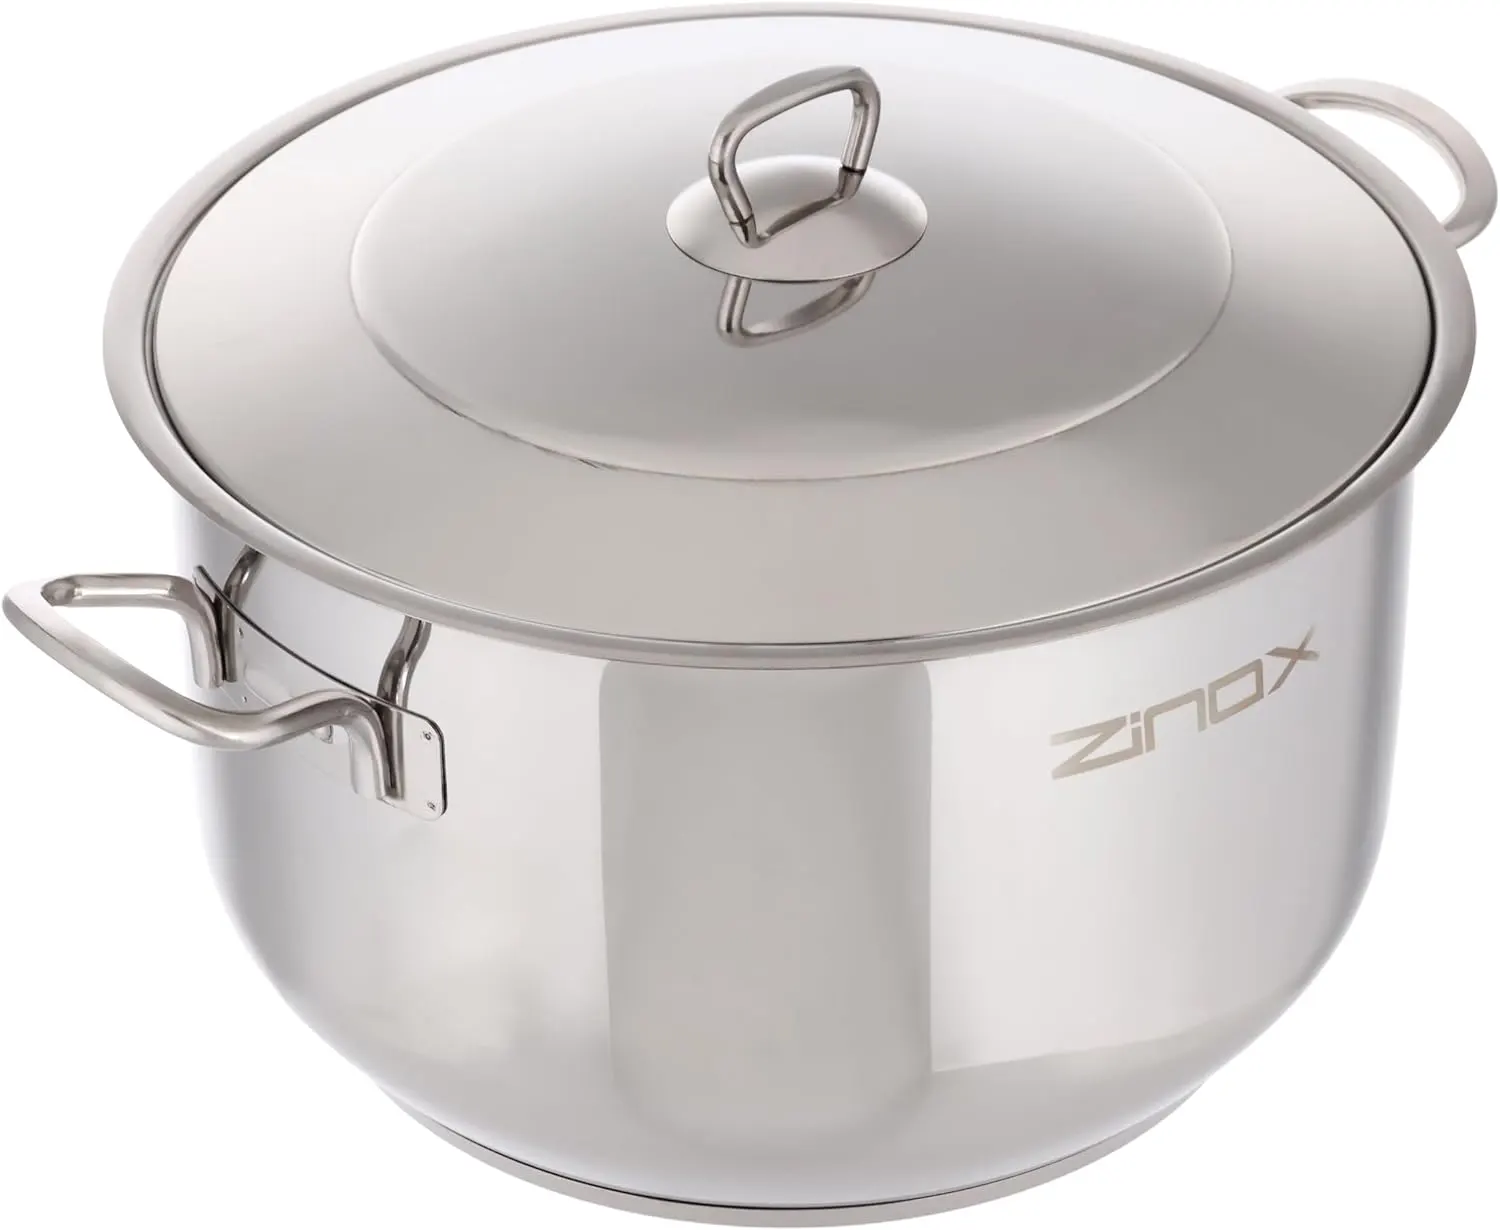 Zinox Classic stainless steel pot , size 32, silver